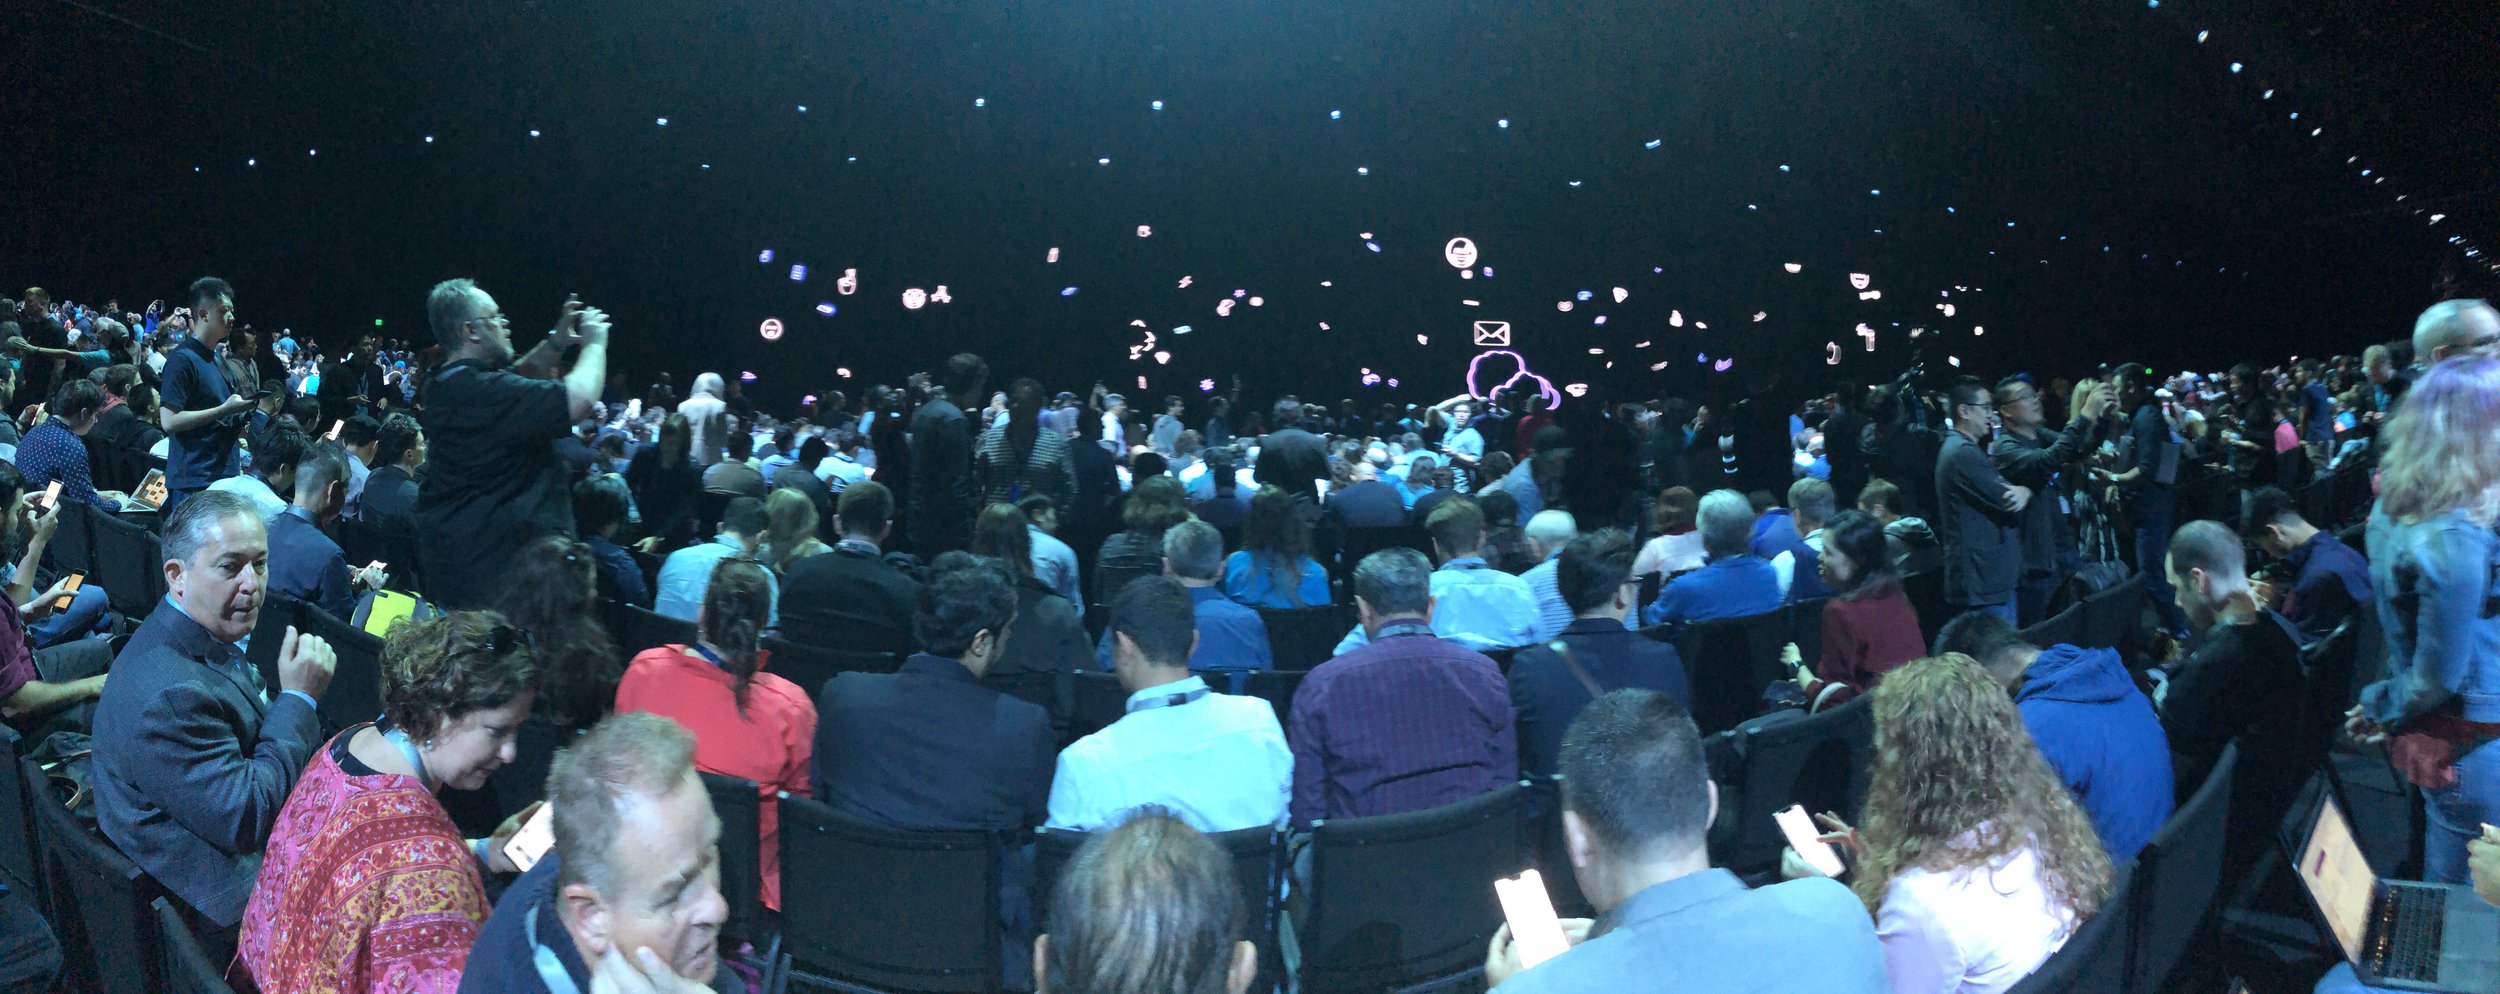 Waiting for the Keynote